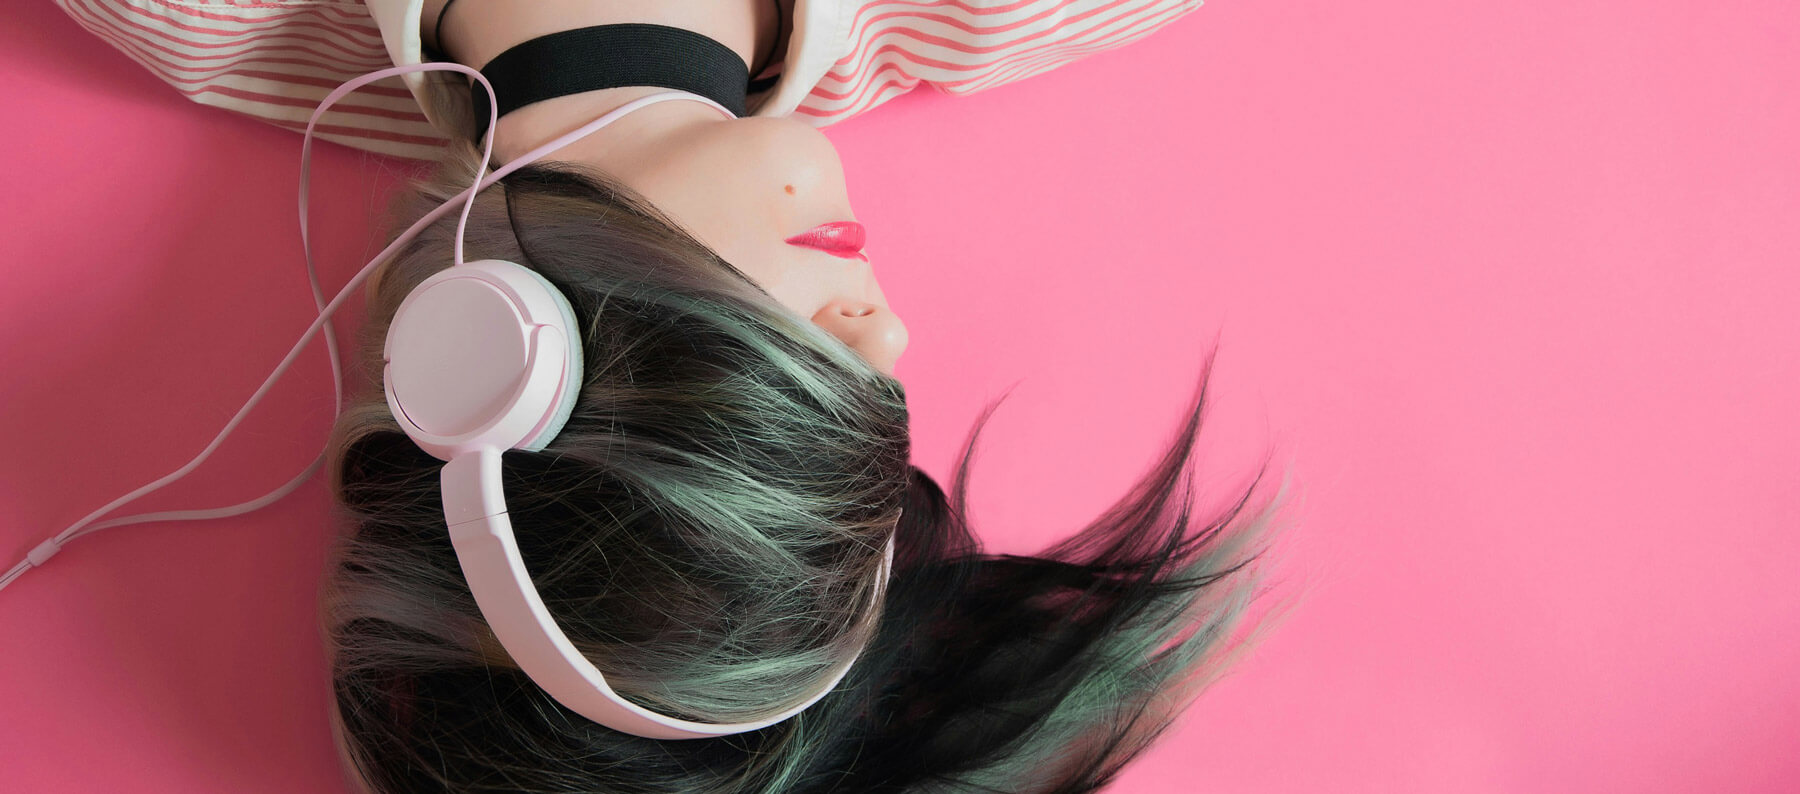 Music industry trends - showing a music brand image of a woman with headphones laying on a pink background